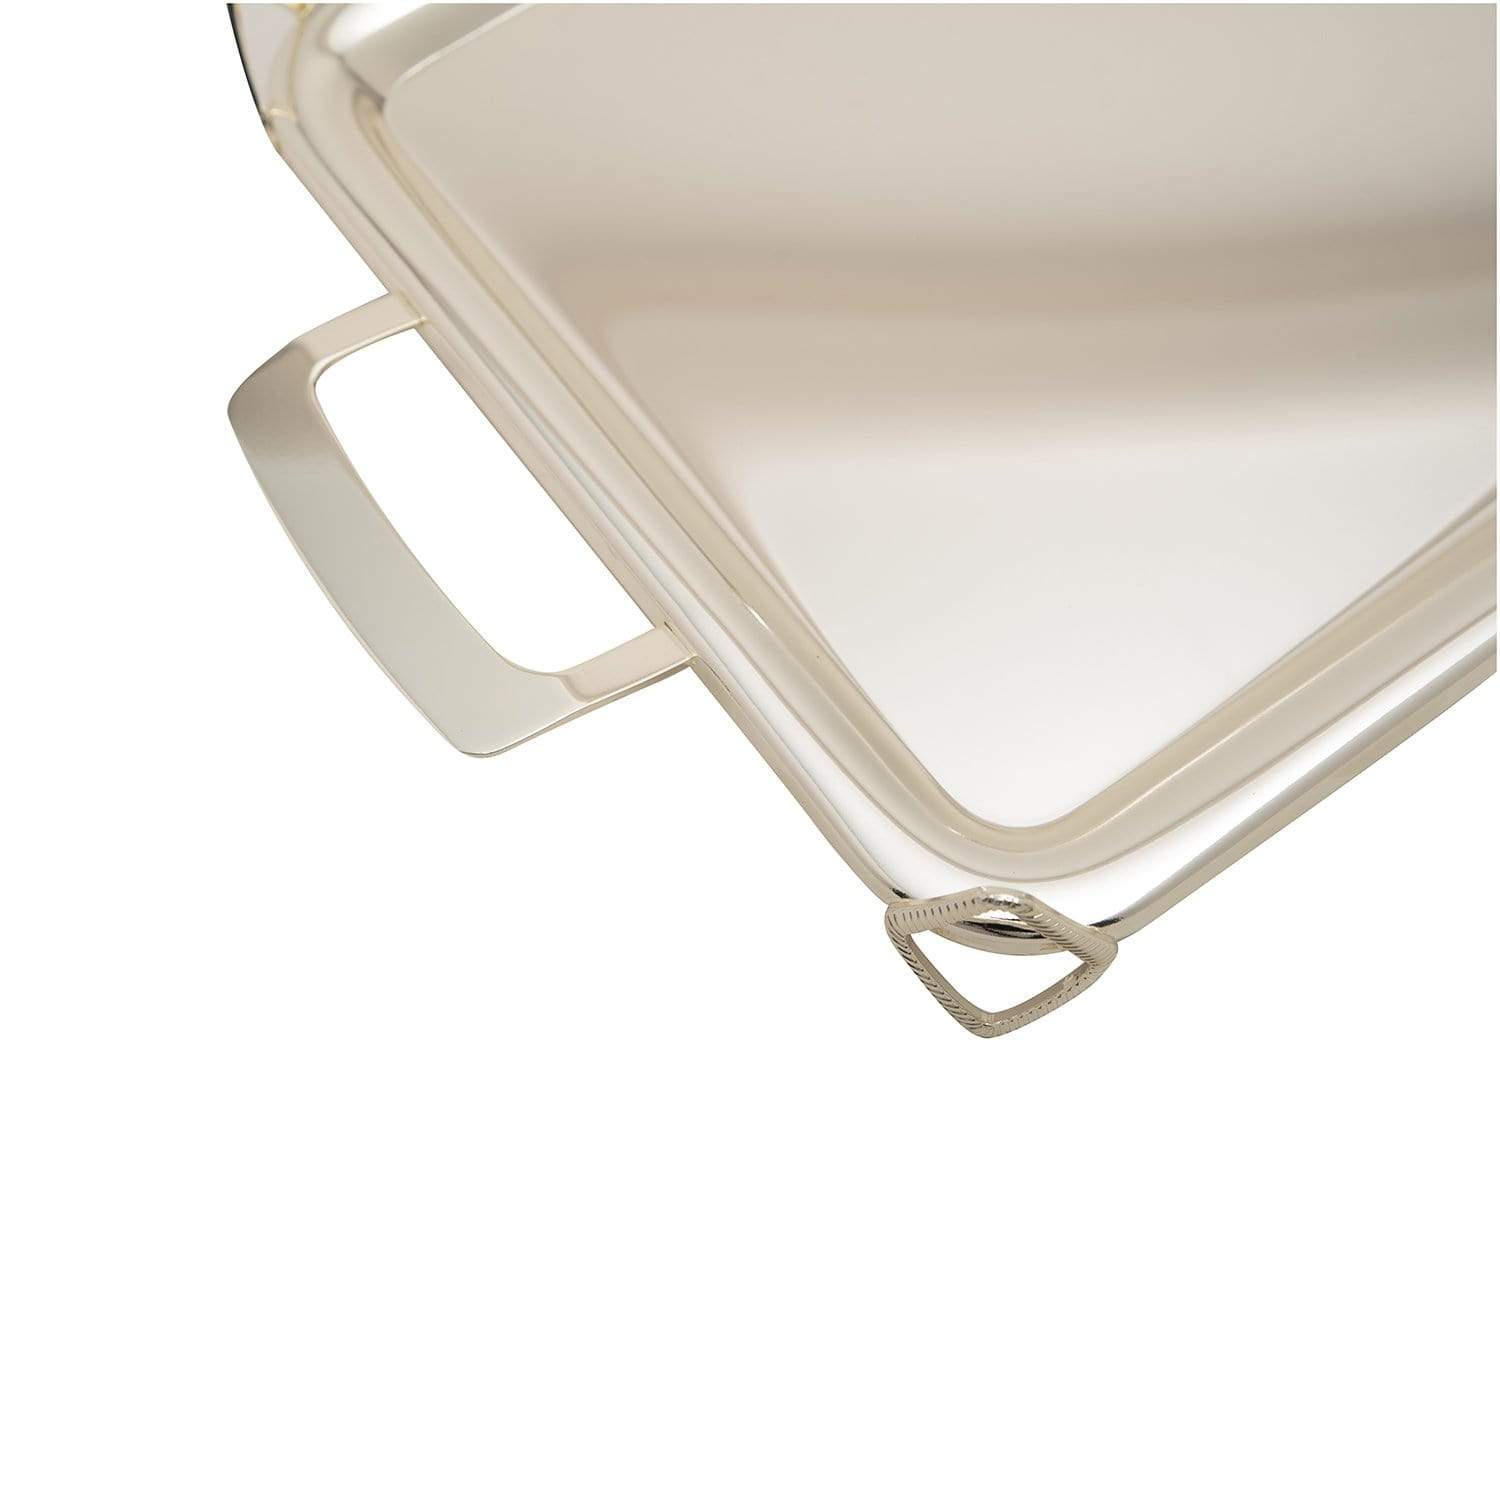 SILVER PLATED RECTANGLE TRAY WITH HANDLE & FEET